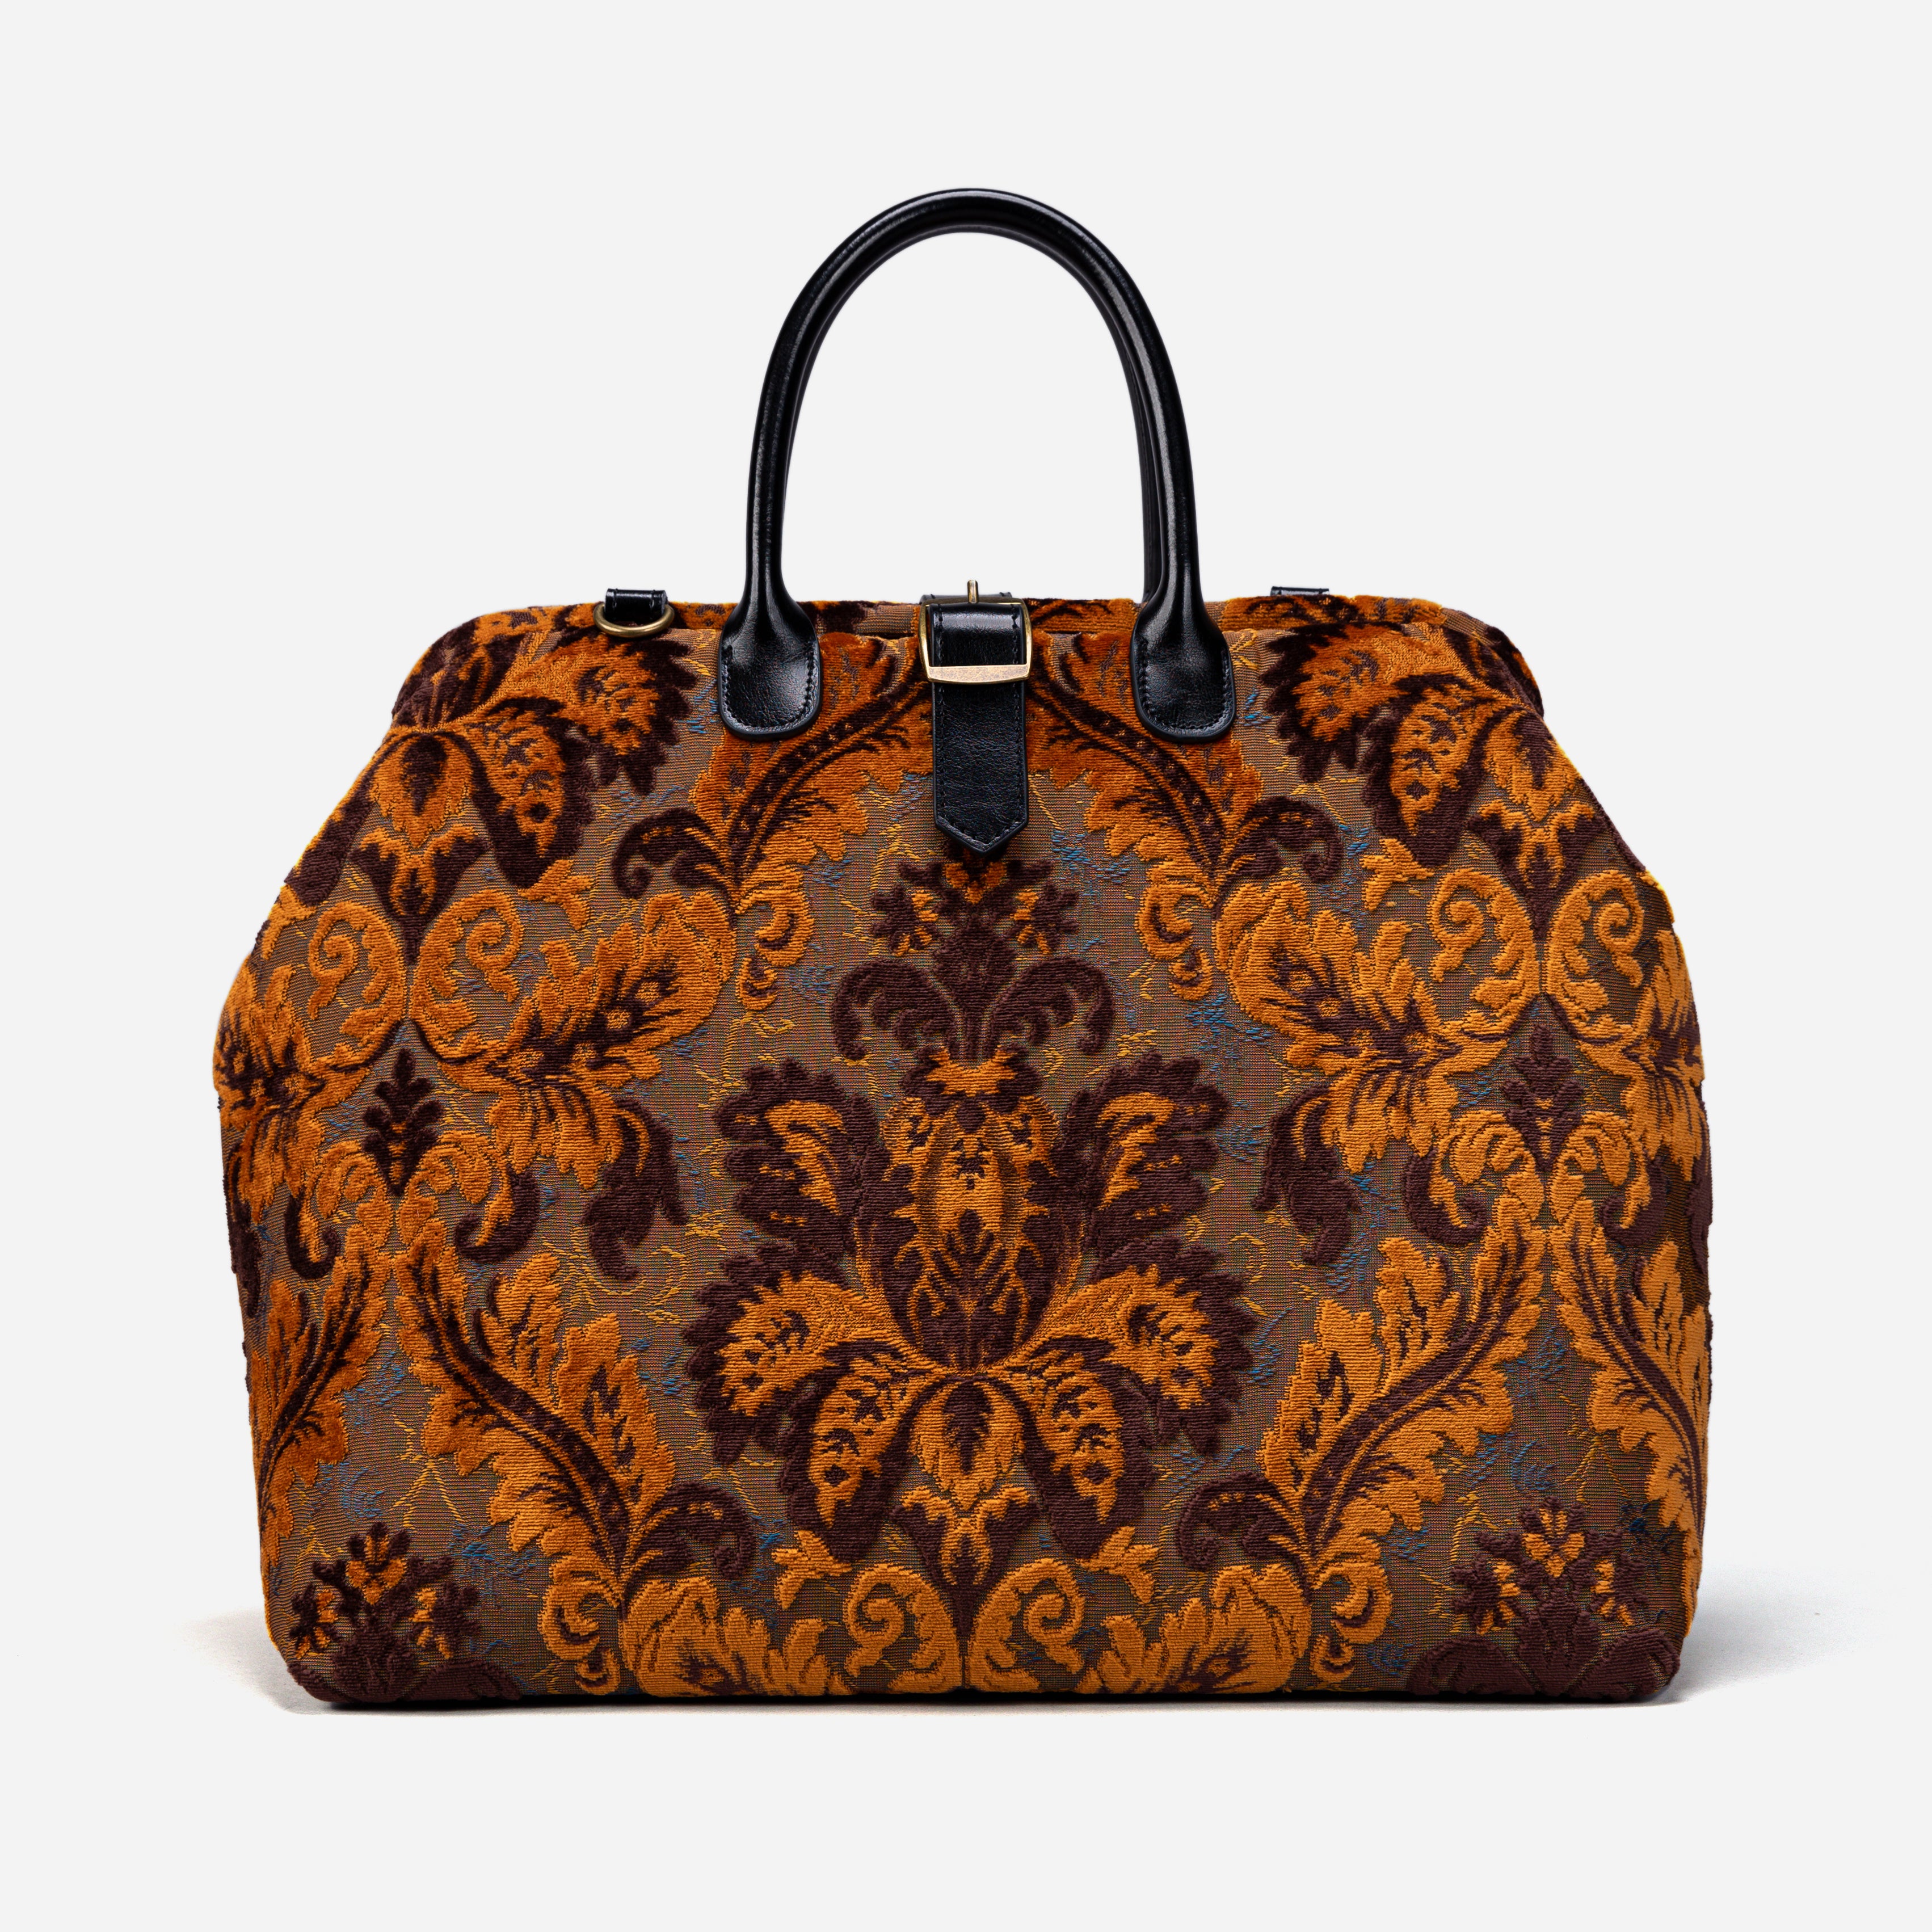 Mary Poppins Carpetbag Revival sienna weekender front